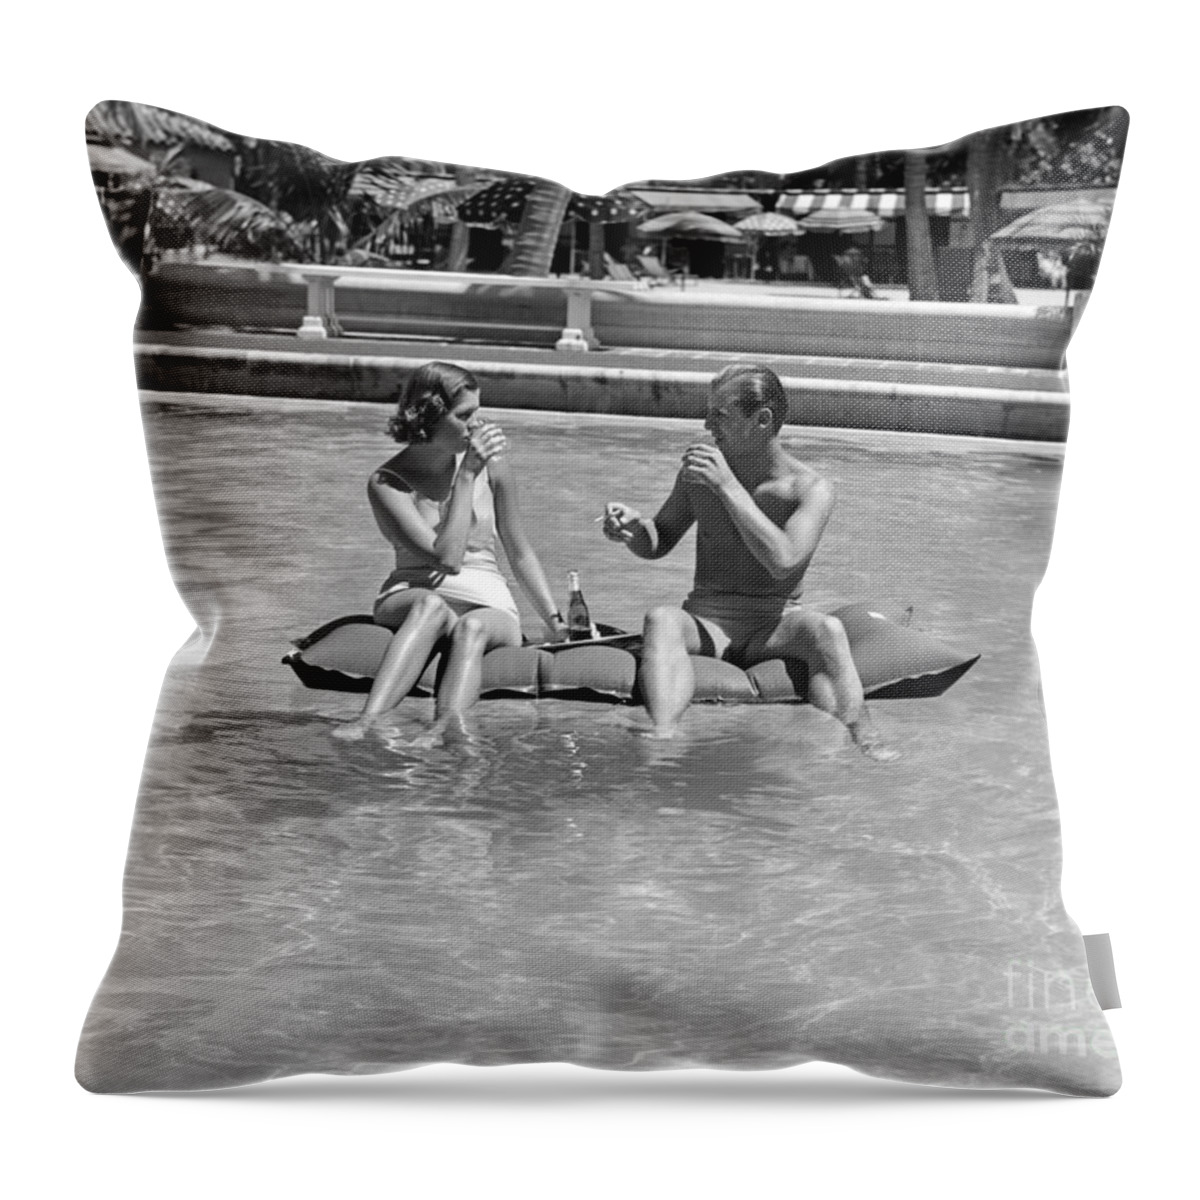 1930s Throw Pillow featuring the photograph Couple Relaxing In Pool, C.1930-40s by H Armstrong Roberts and ClassicStock